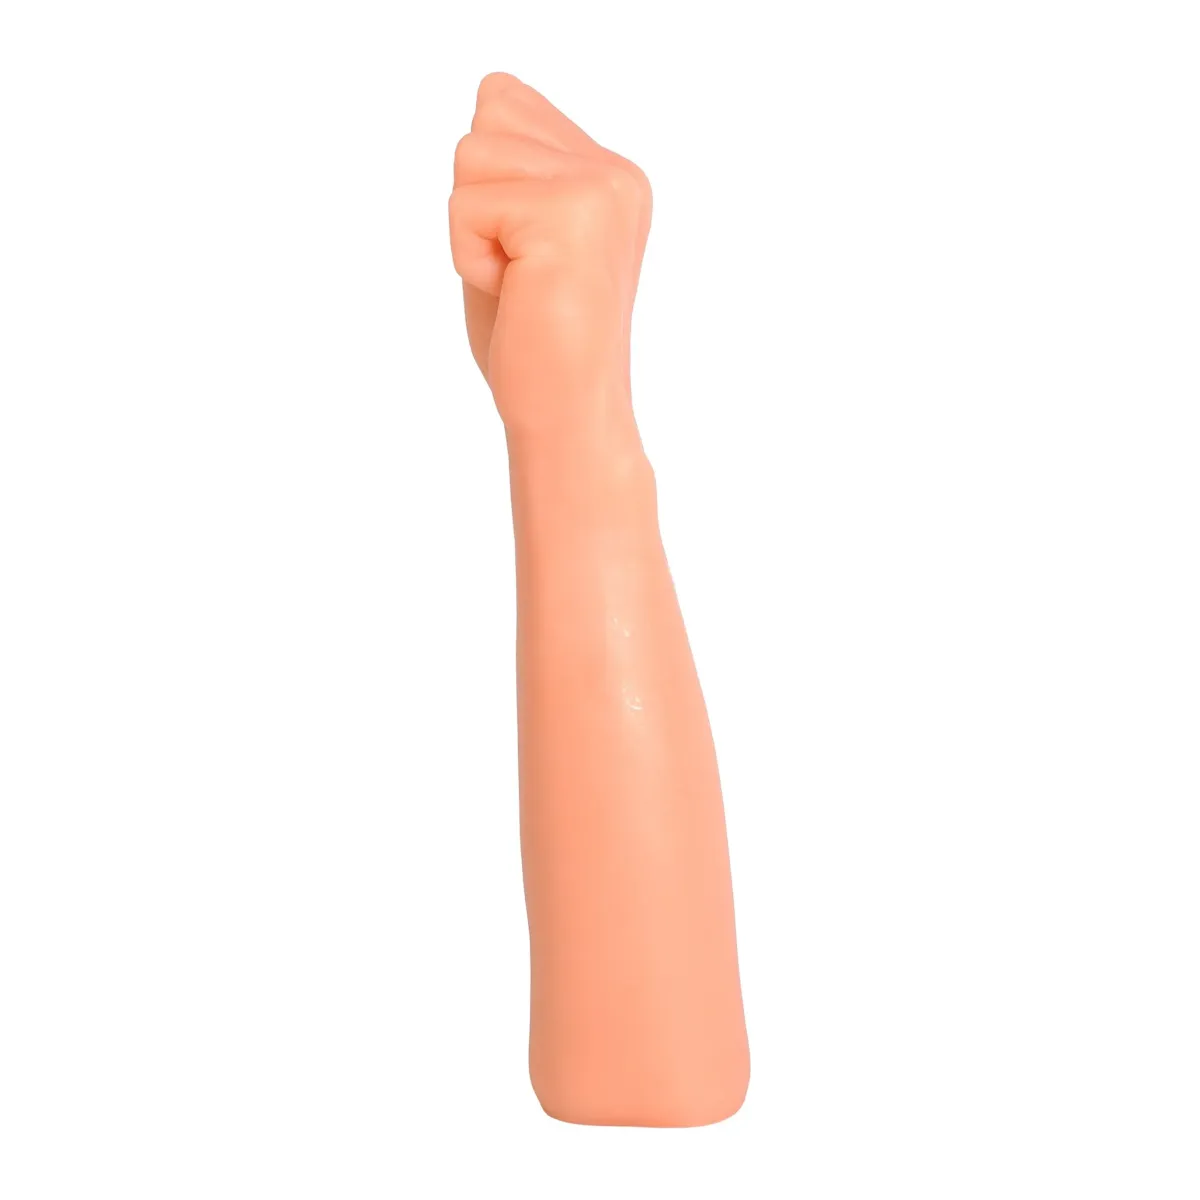 Fallo anale vaginale The Fist ToyJoy Get Real 30 cm